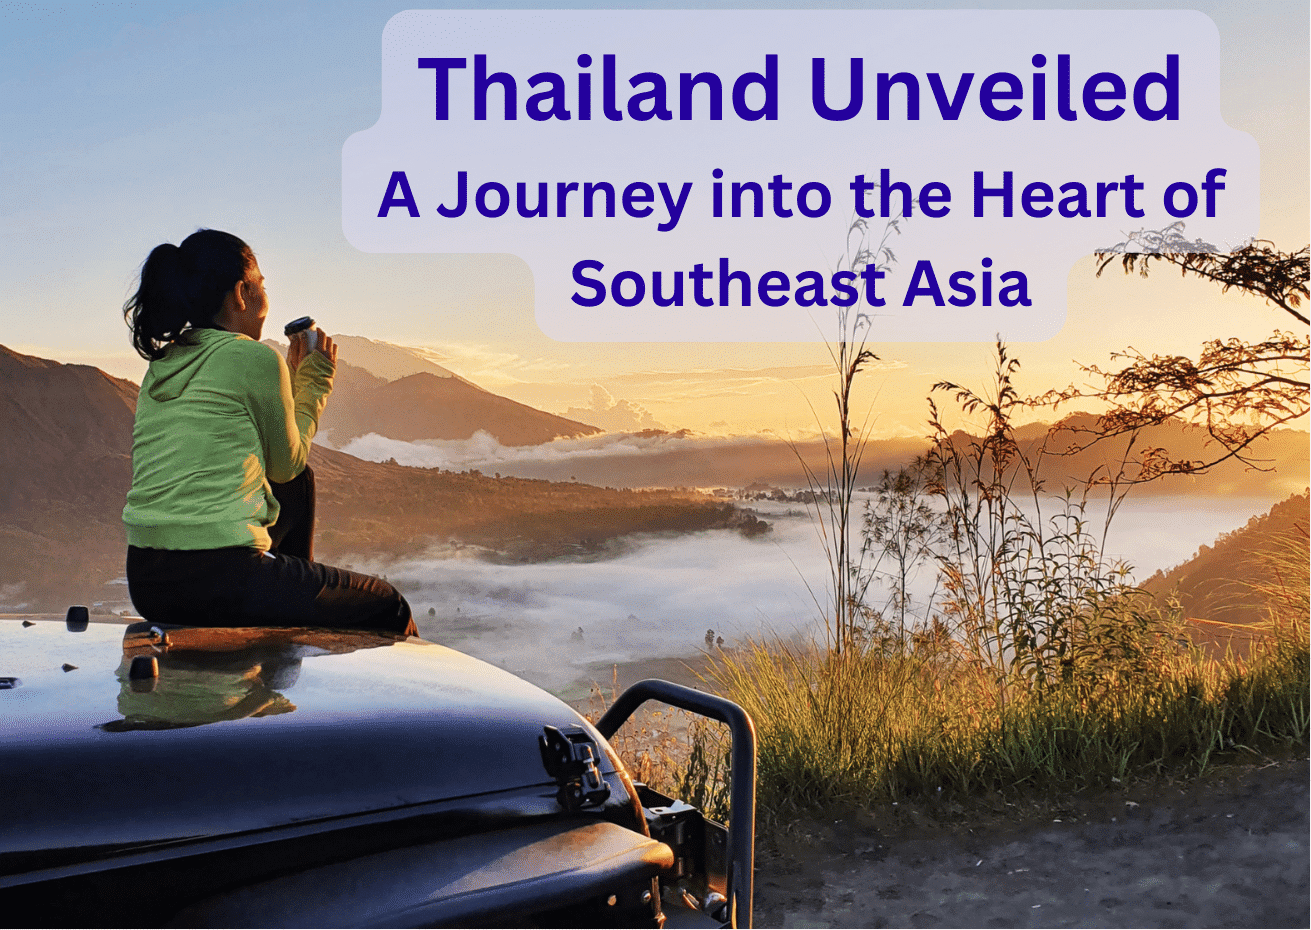 Thailand Unveiled: A Journey into the Heart of Southeast Asia